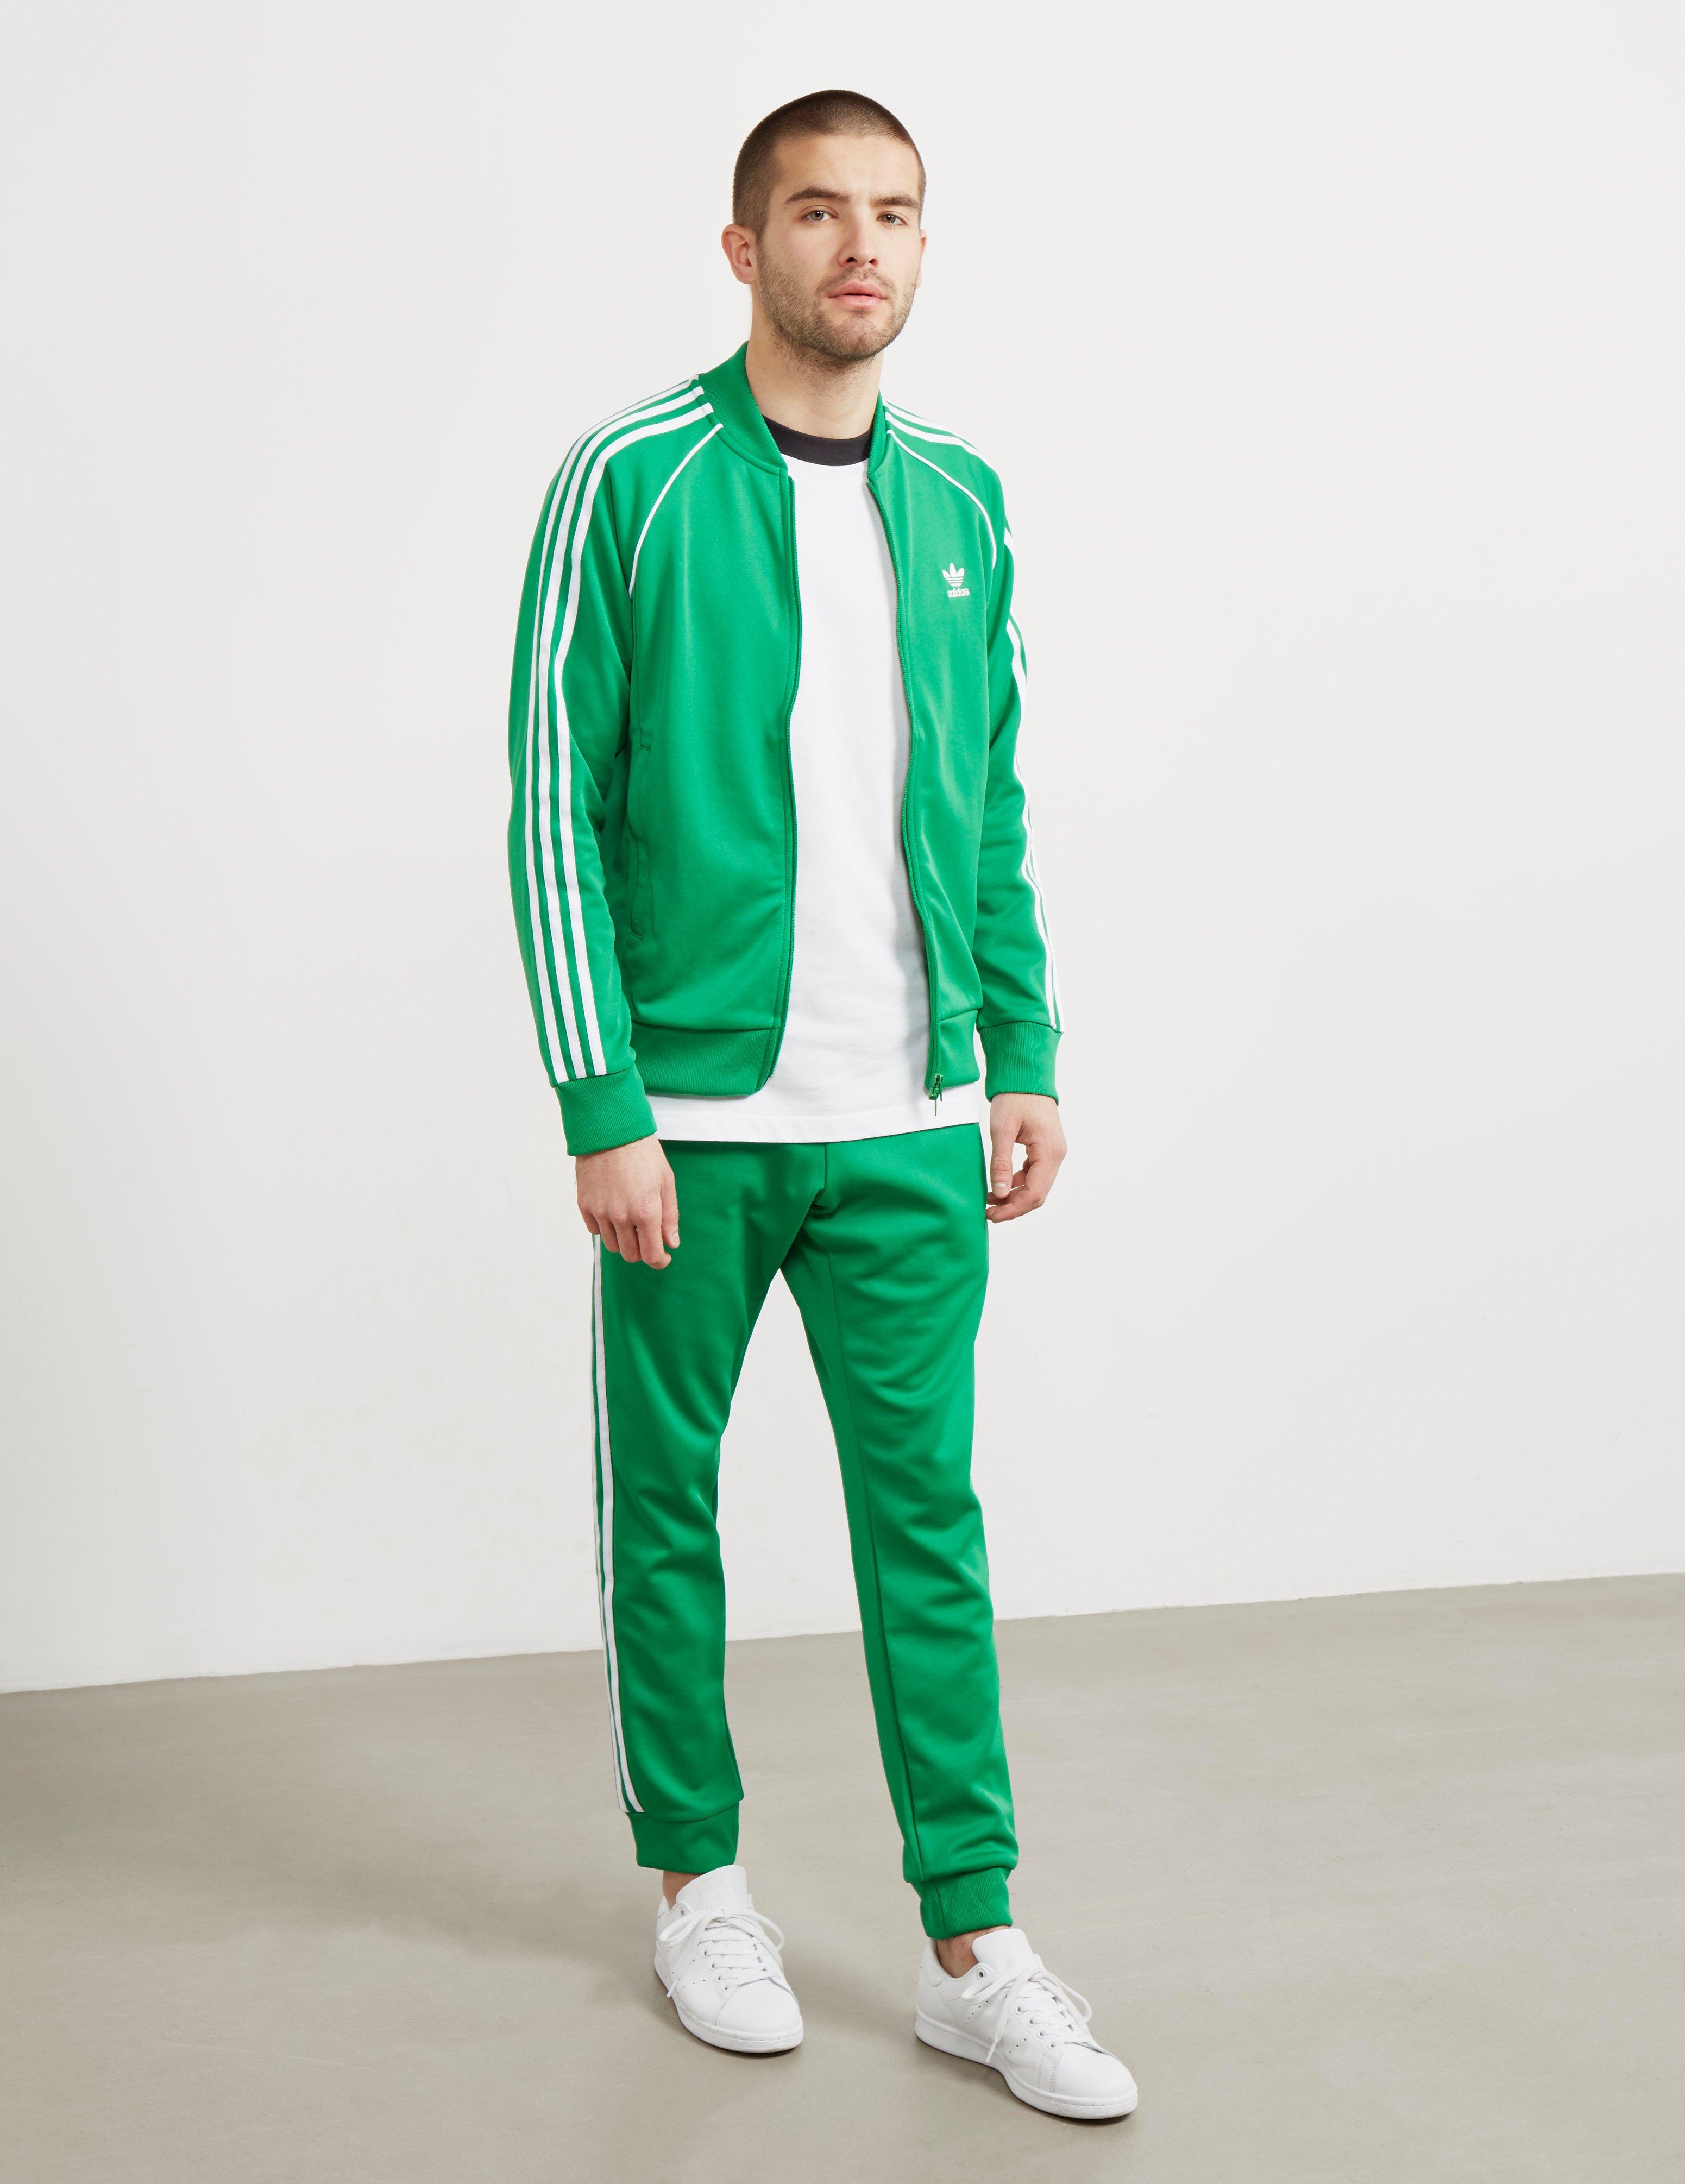 adidas Originals Synthetic Tracksuit Top in Green for Men - Lyst